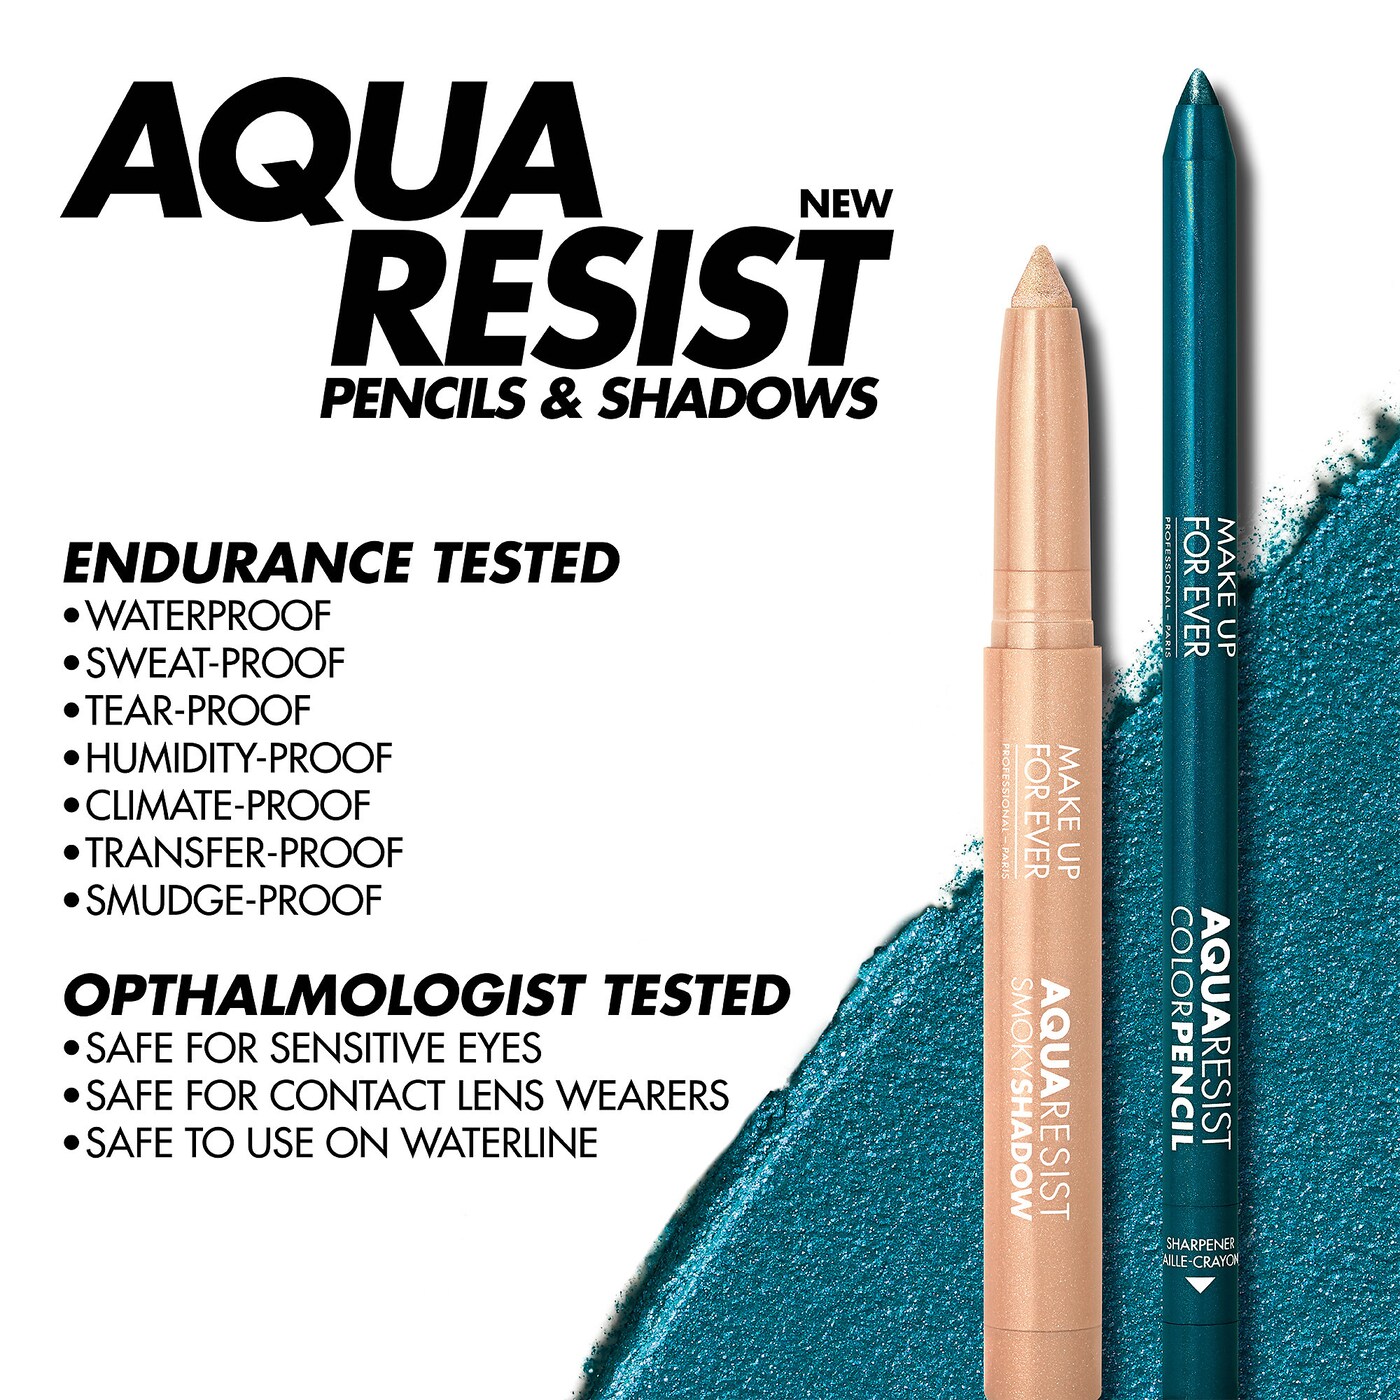 MAKE UP FOR EVER - Aqua Seal #PROTIP ! Add some #aquaseal to your eyeshadow  pigments to give them a waterproof texture and intensify the color payoff!  #makeupforever #makeupforeversg #aquaseal #makeuptips #makeuptutorial